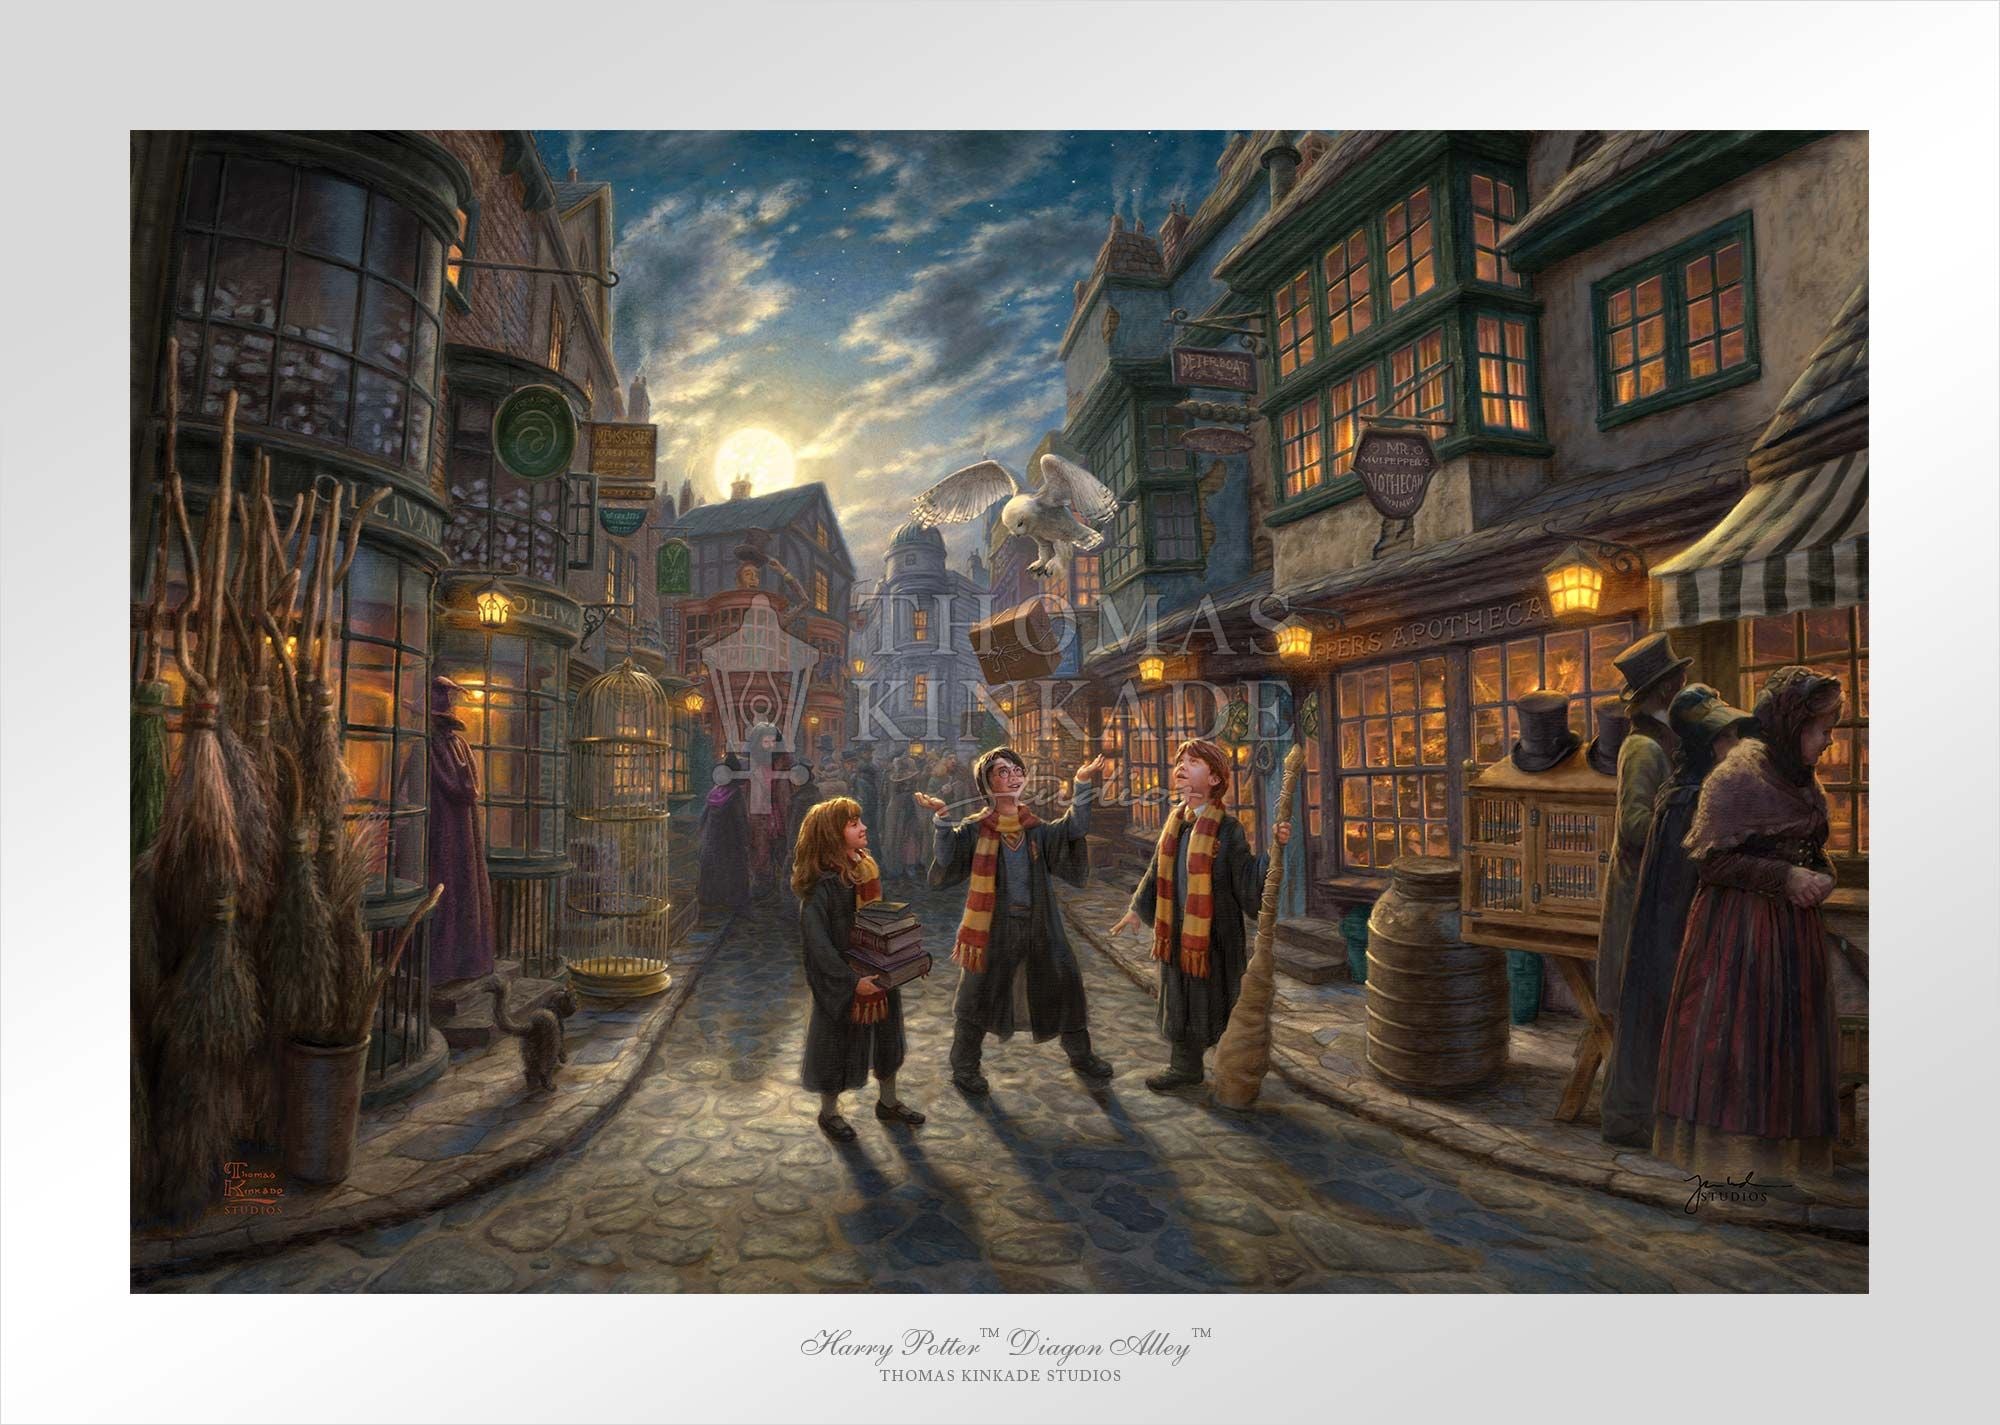 Harry Potter, Ron Weasley, and Hermione Granger all have ventured through the walled courtyard - Unframed paper